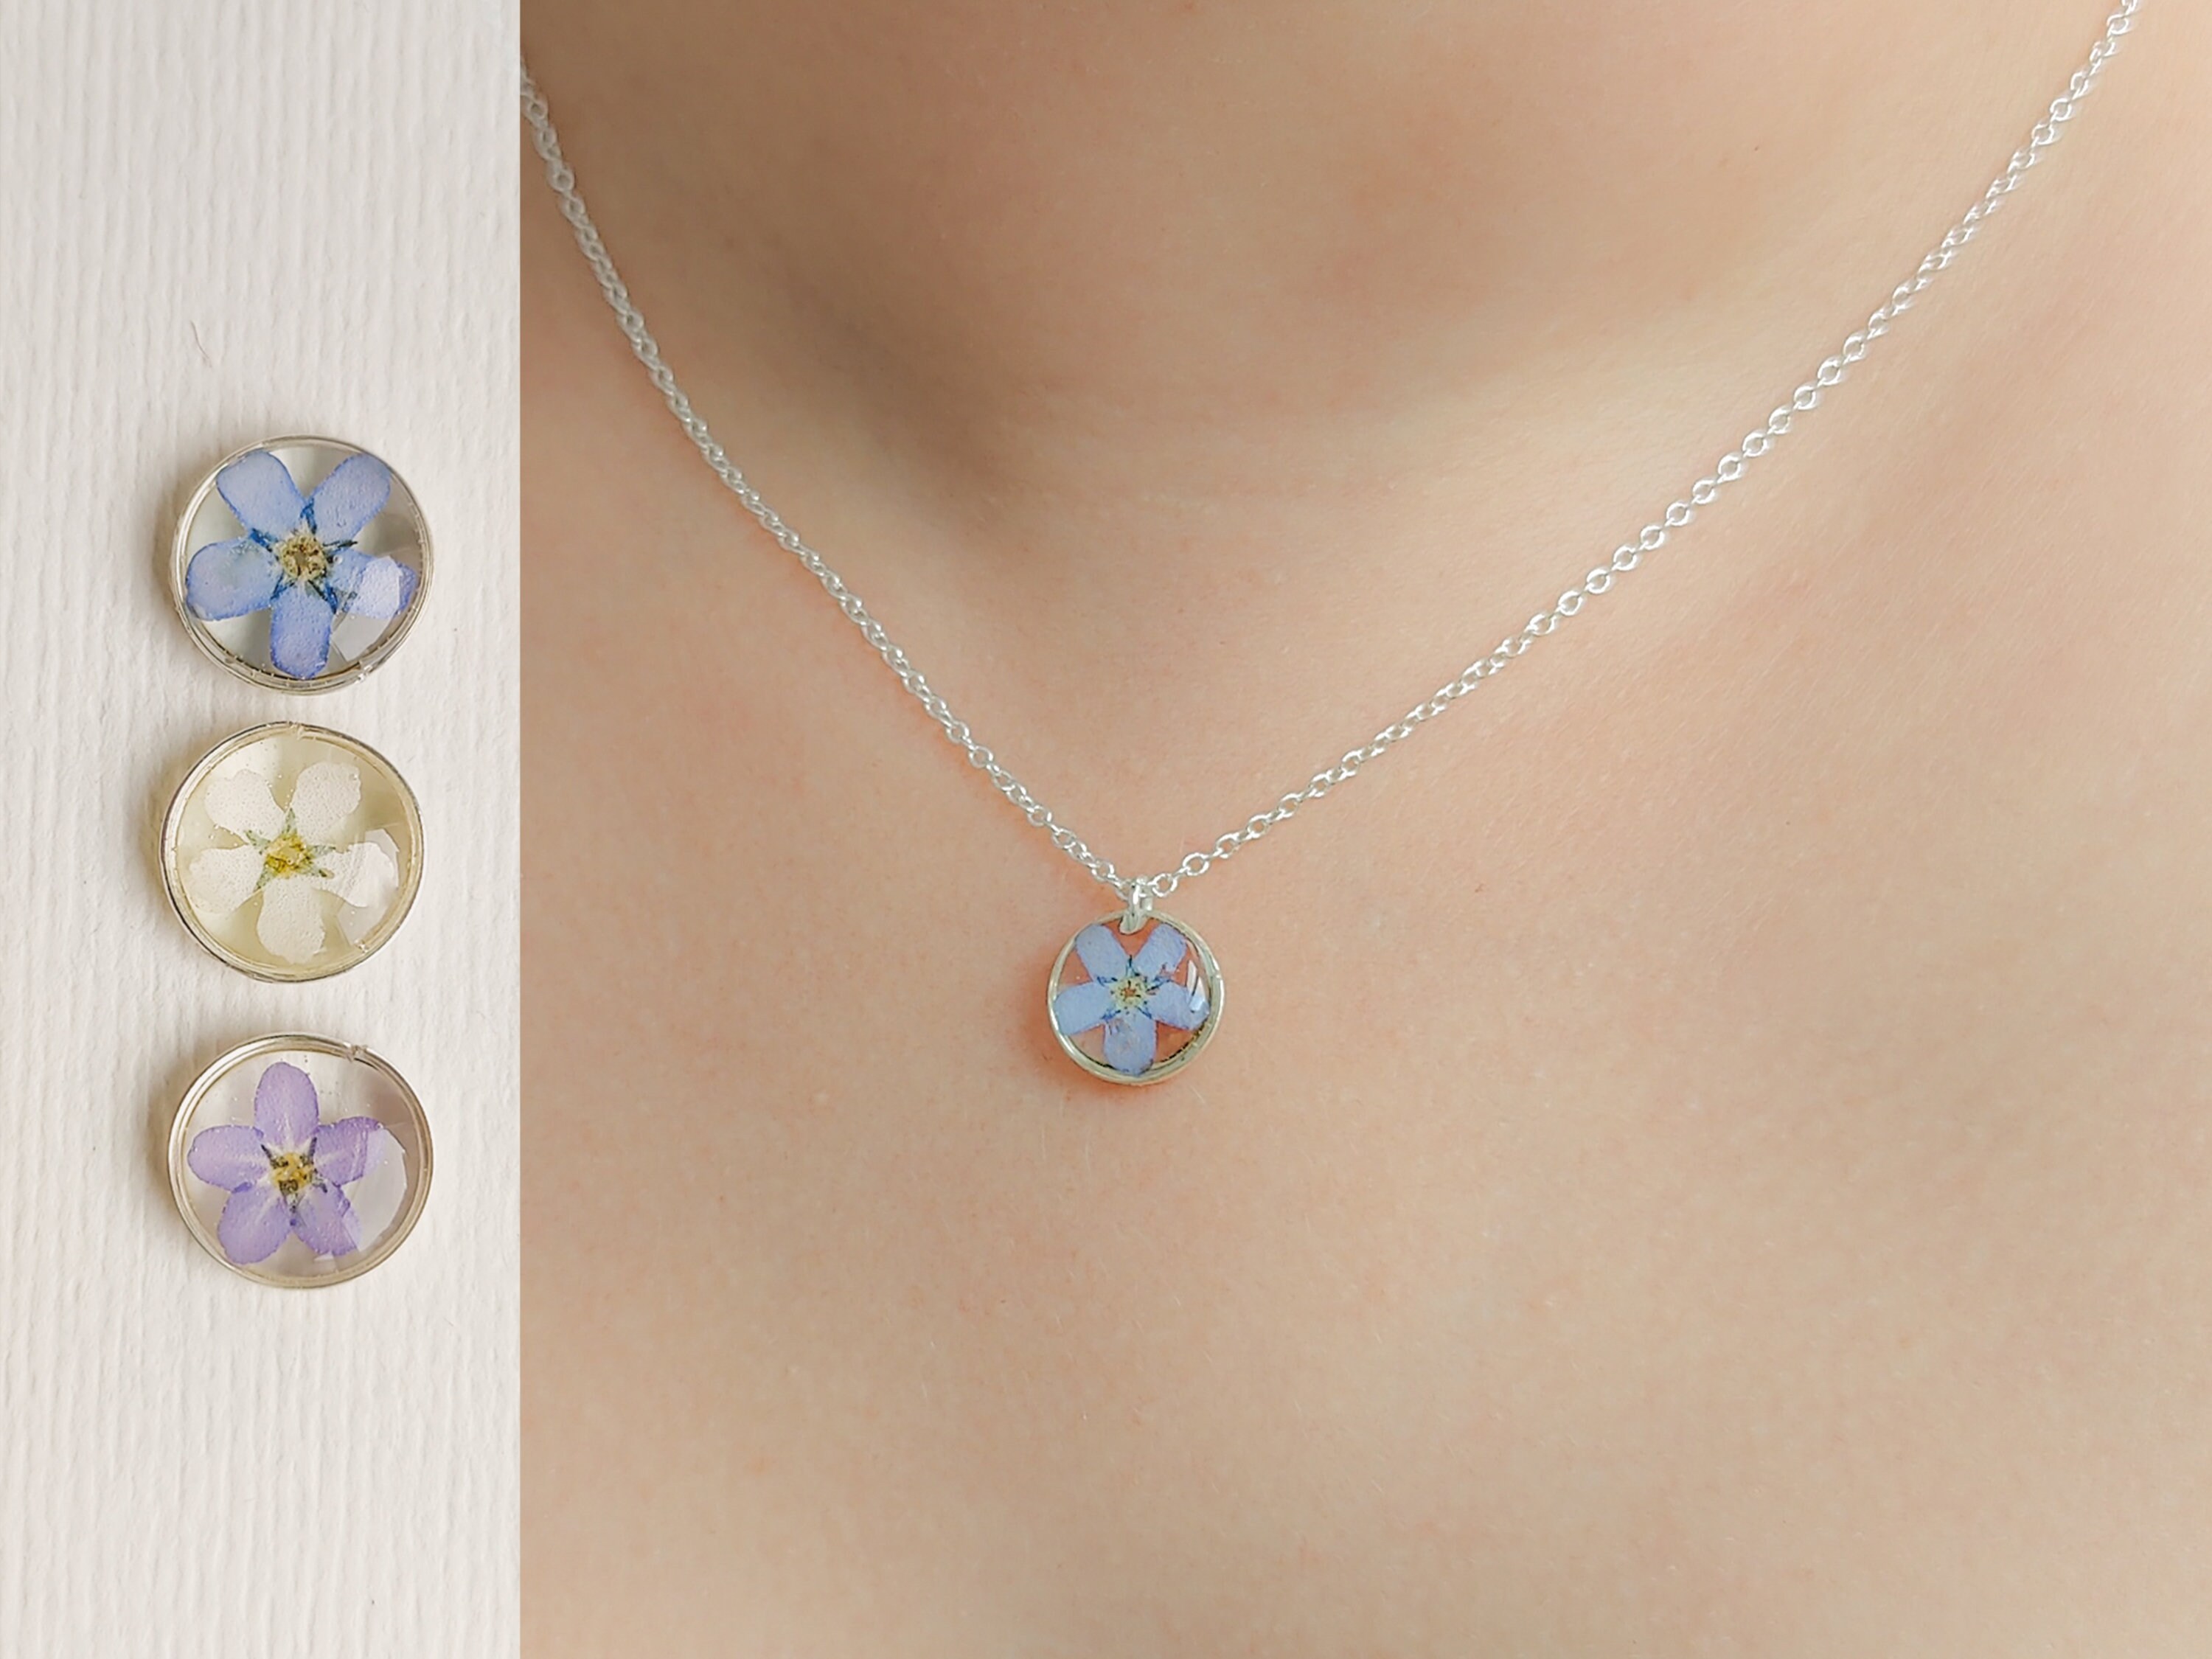 Forget Me Not Real Dried Flower Necklace Set / Earring, Necklace & Earrings by myBageecha